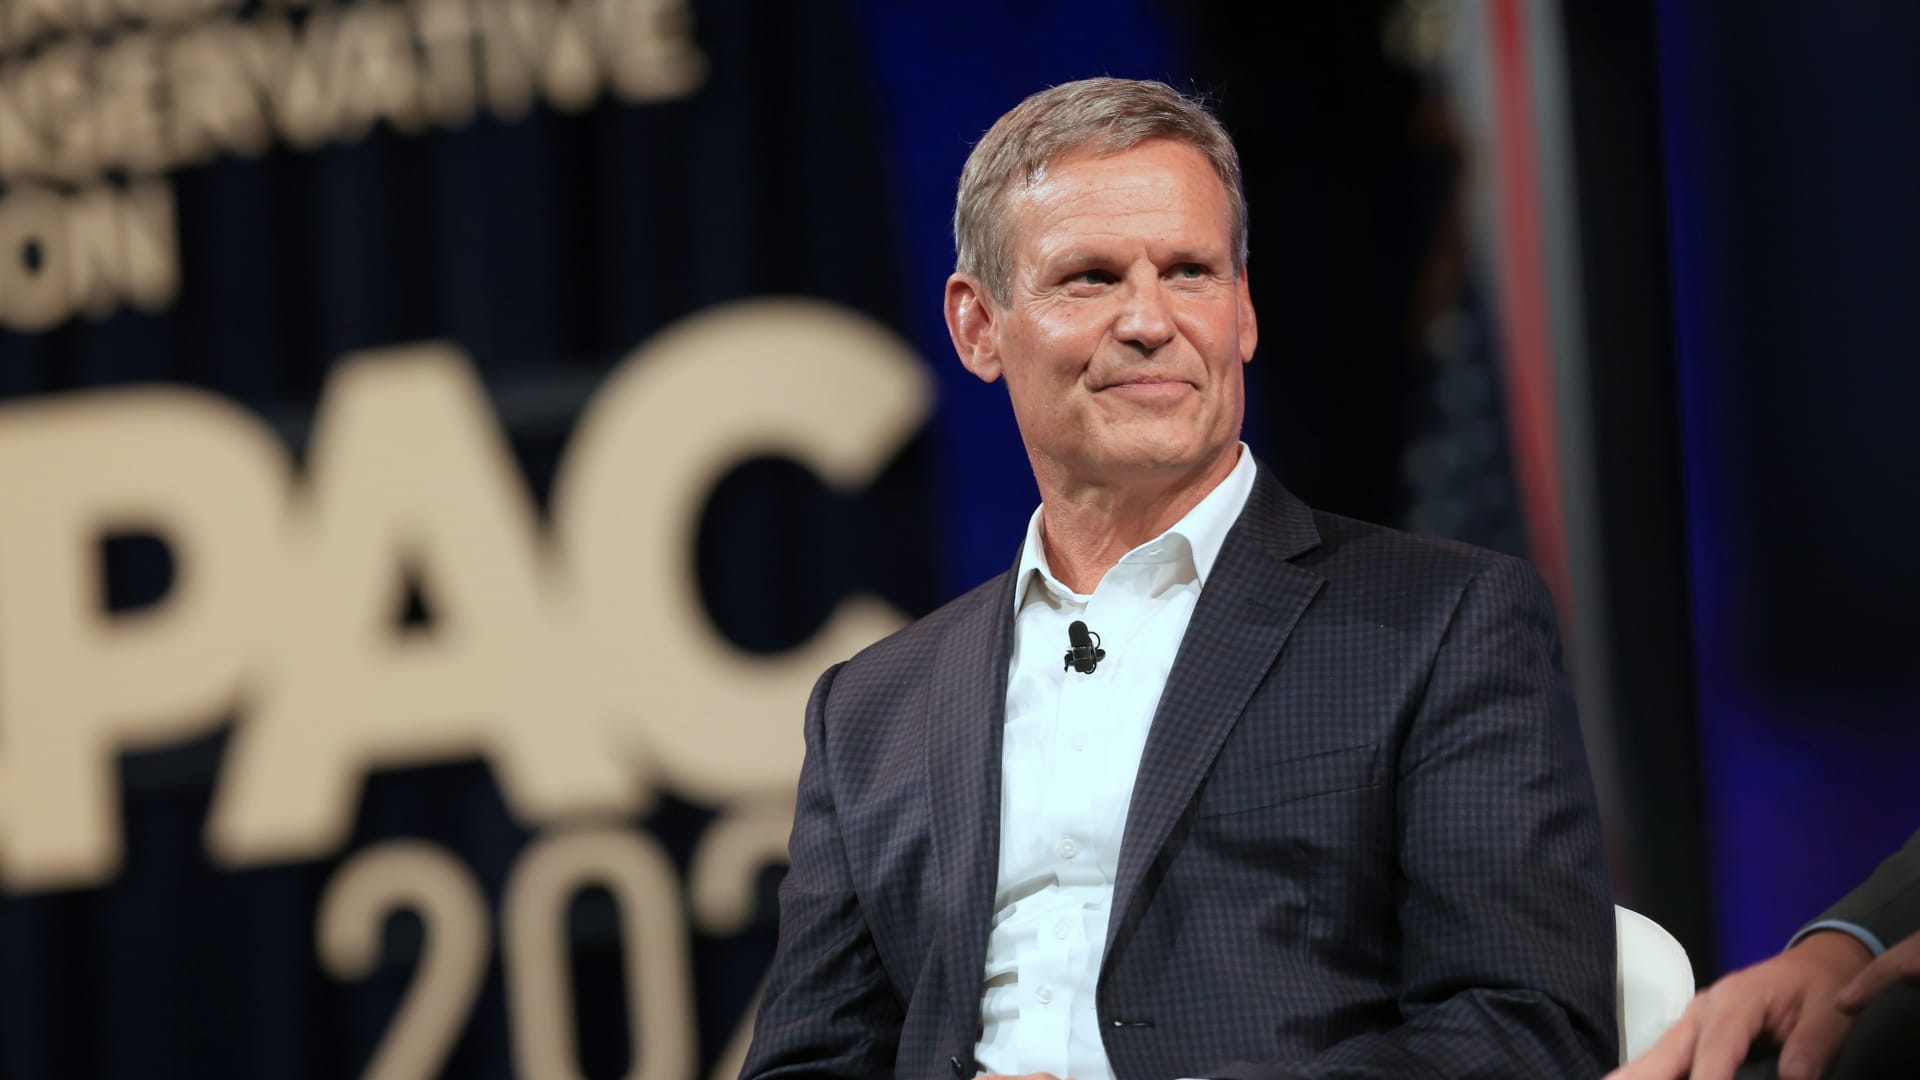 Bill Lee, governor of Tennessee, smiles during the Conservative Political Action Conference (CPAC) in Dallas, Texas, U.S., on Saturday, July 10, 2021.